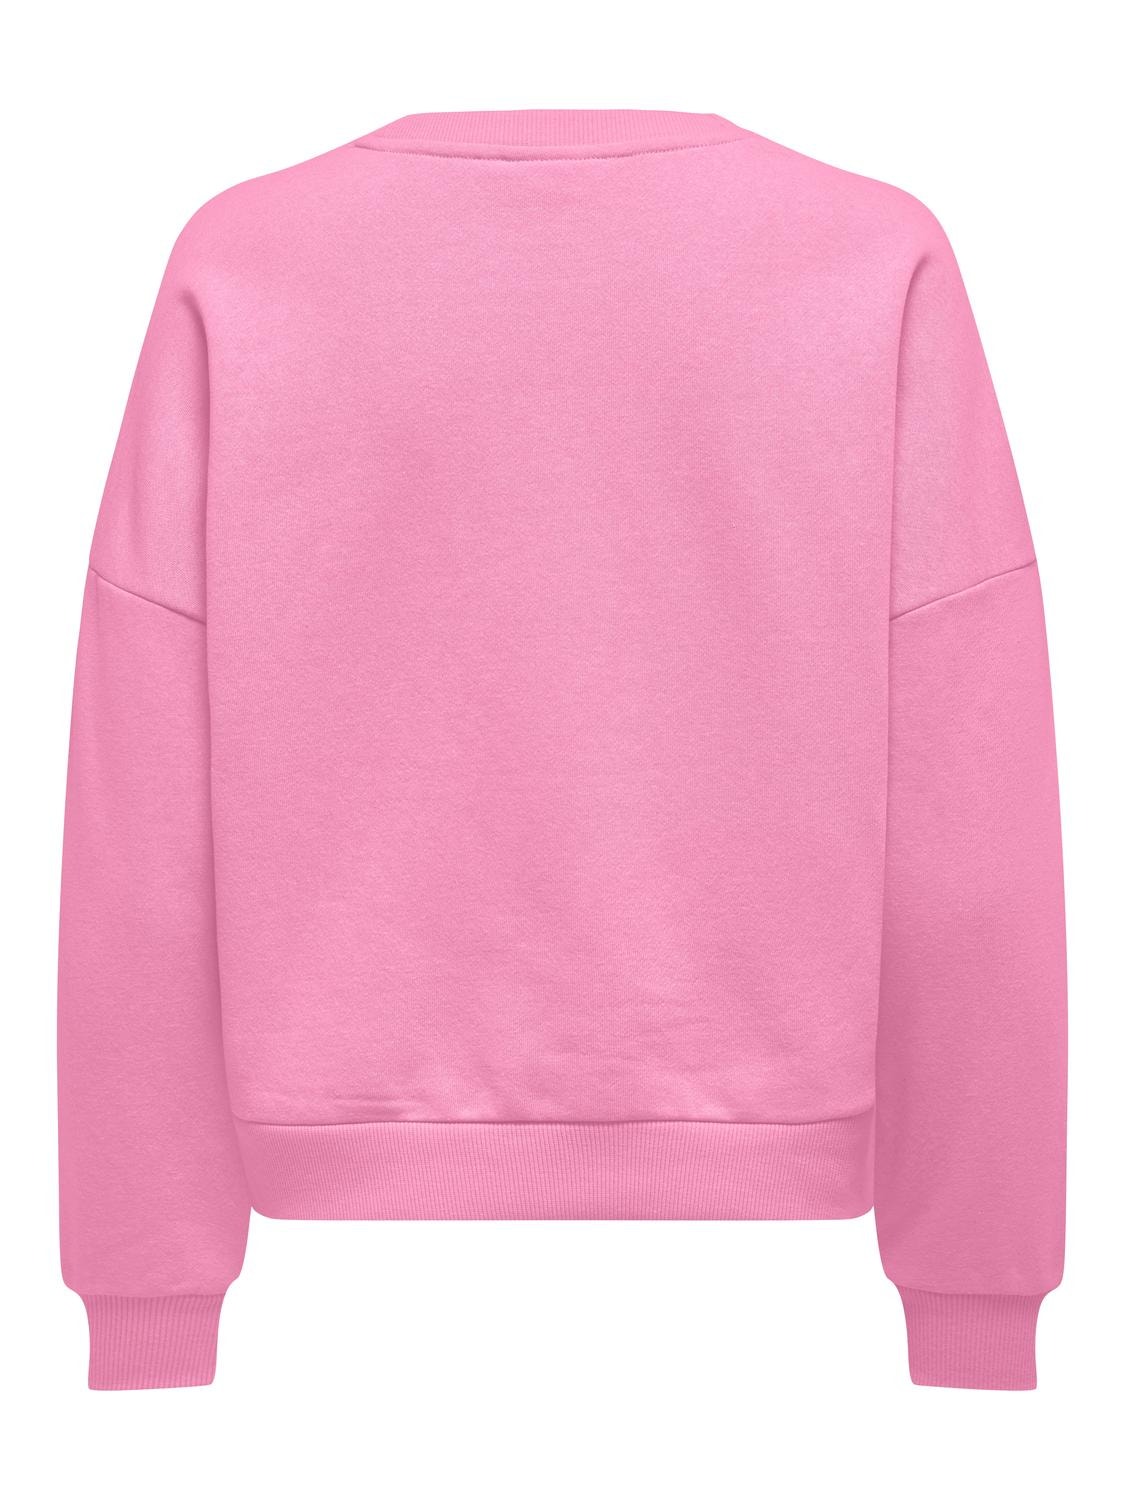 ONLY Regular Fit Round Neck Dropped shoulders Sweatshirt -Fuchsia Pink - 15321400